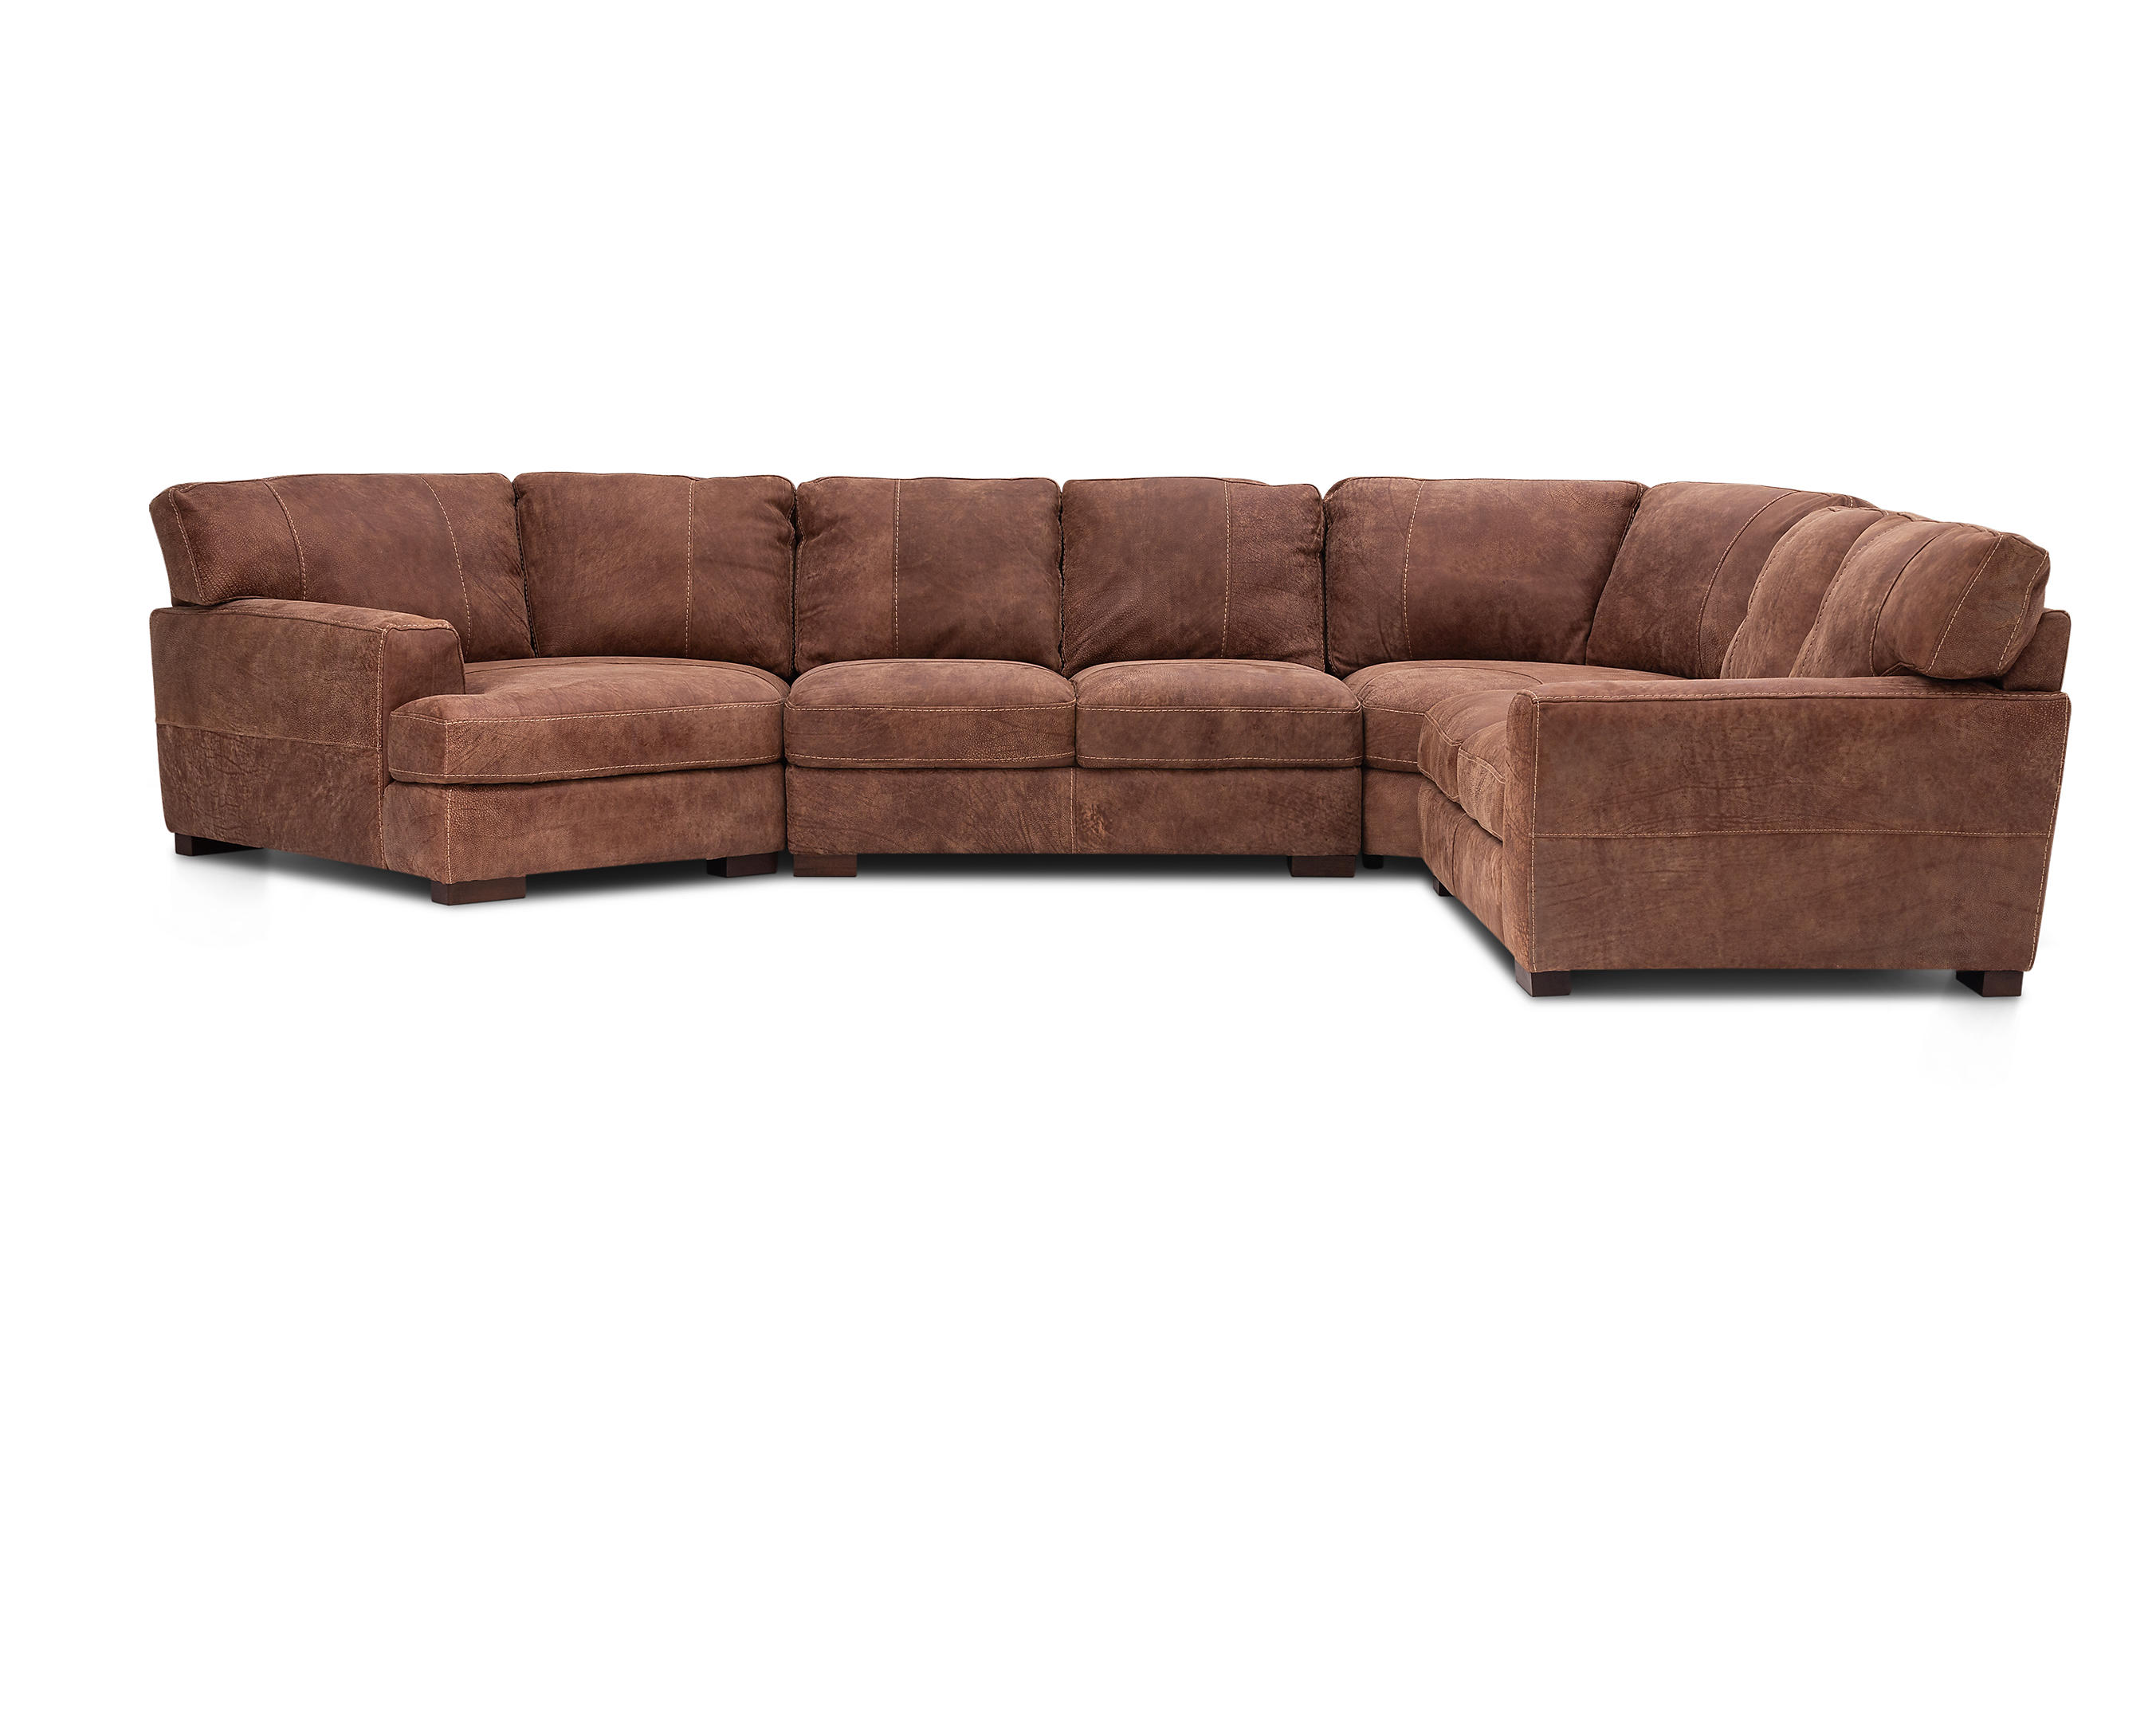 Maximus 4 Pc Sectional Furniture Row, Soft Leather Sectional